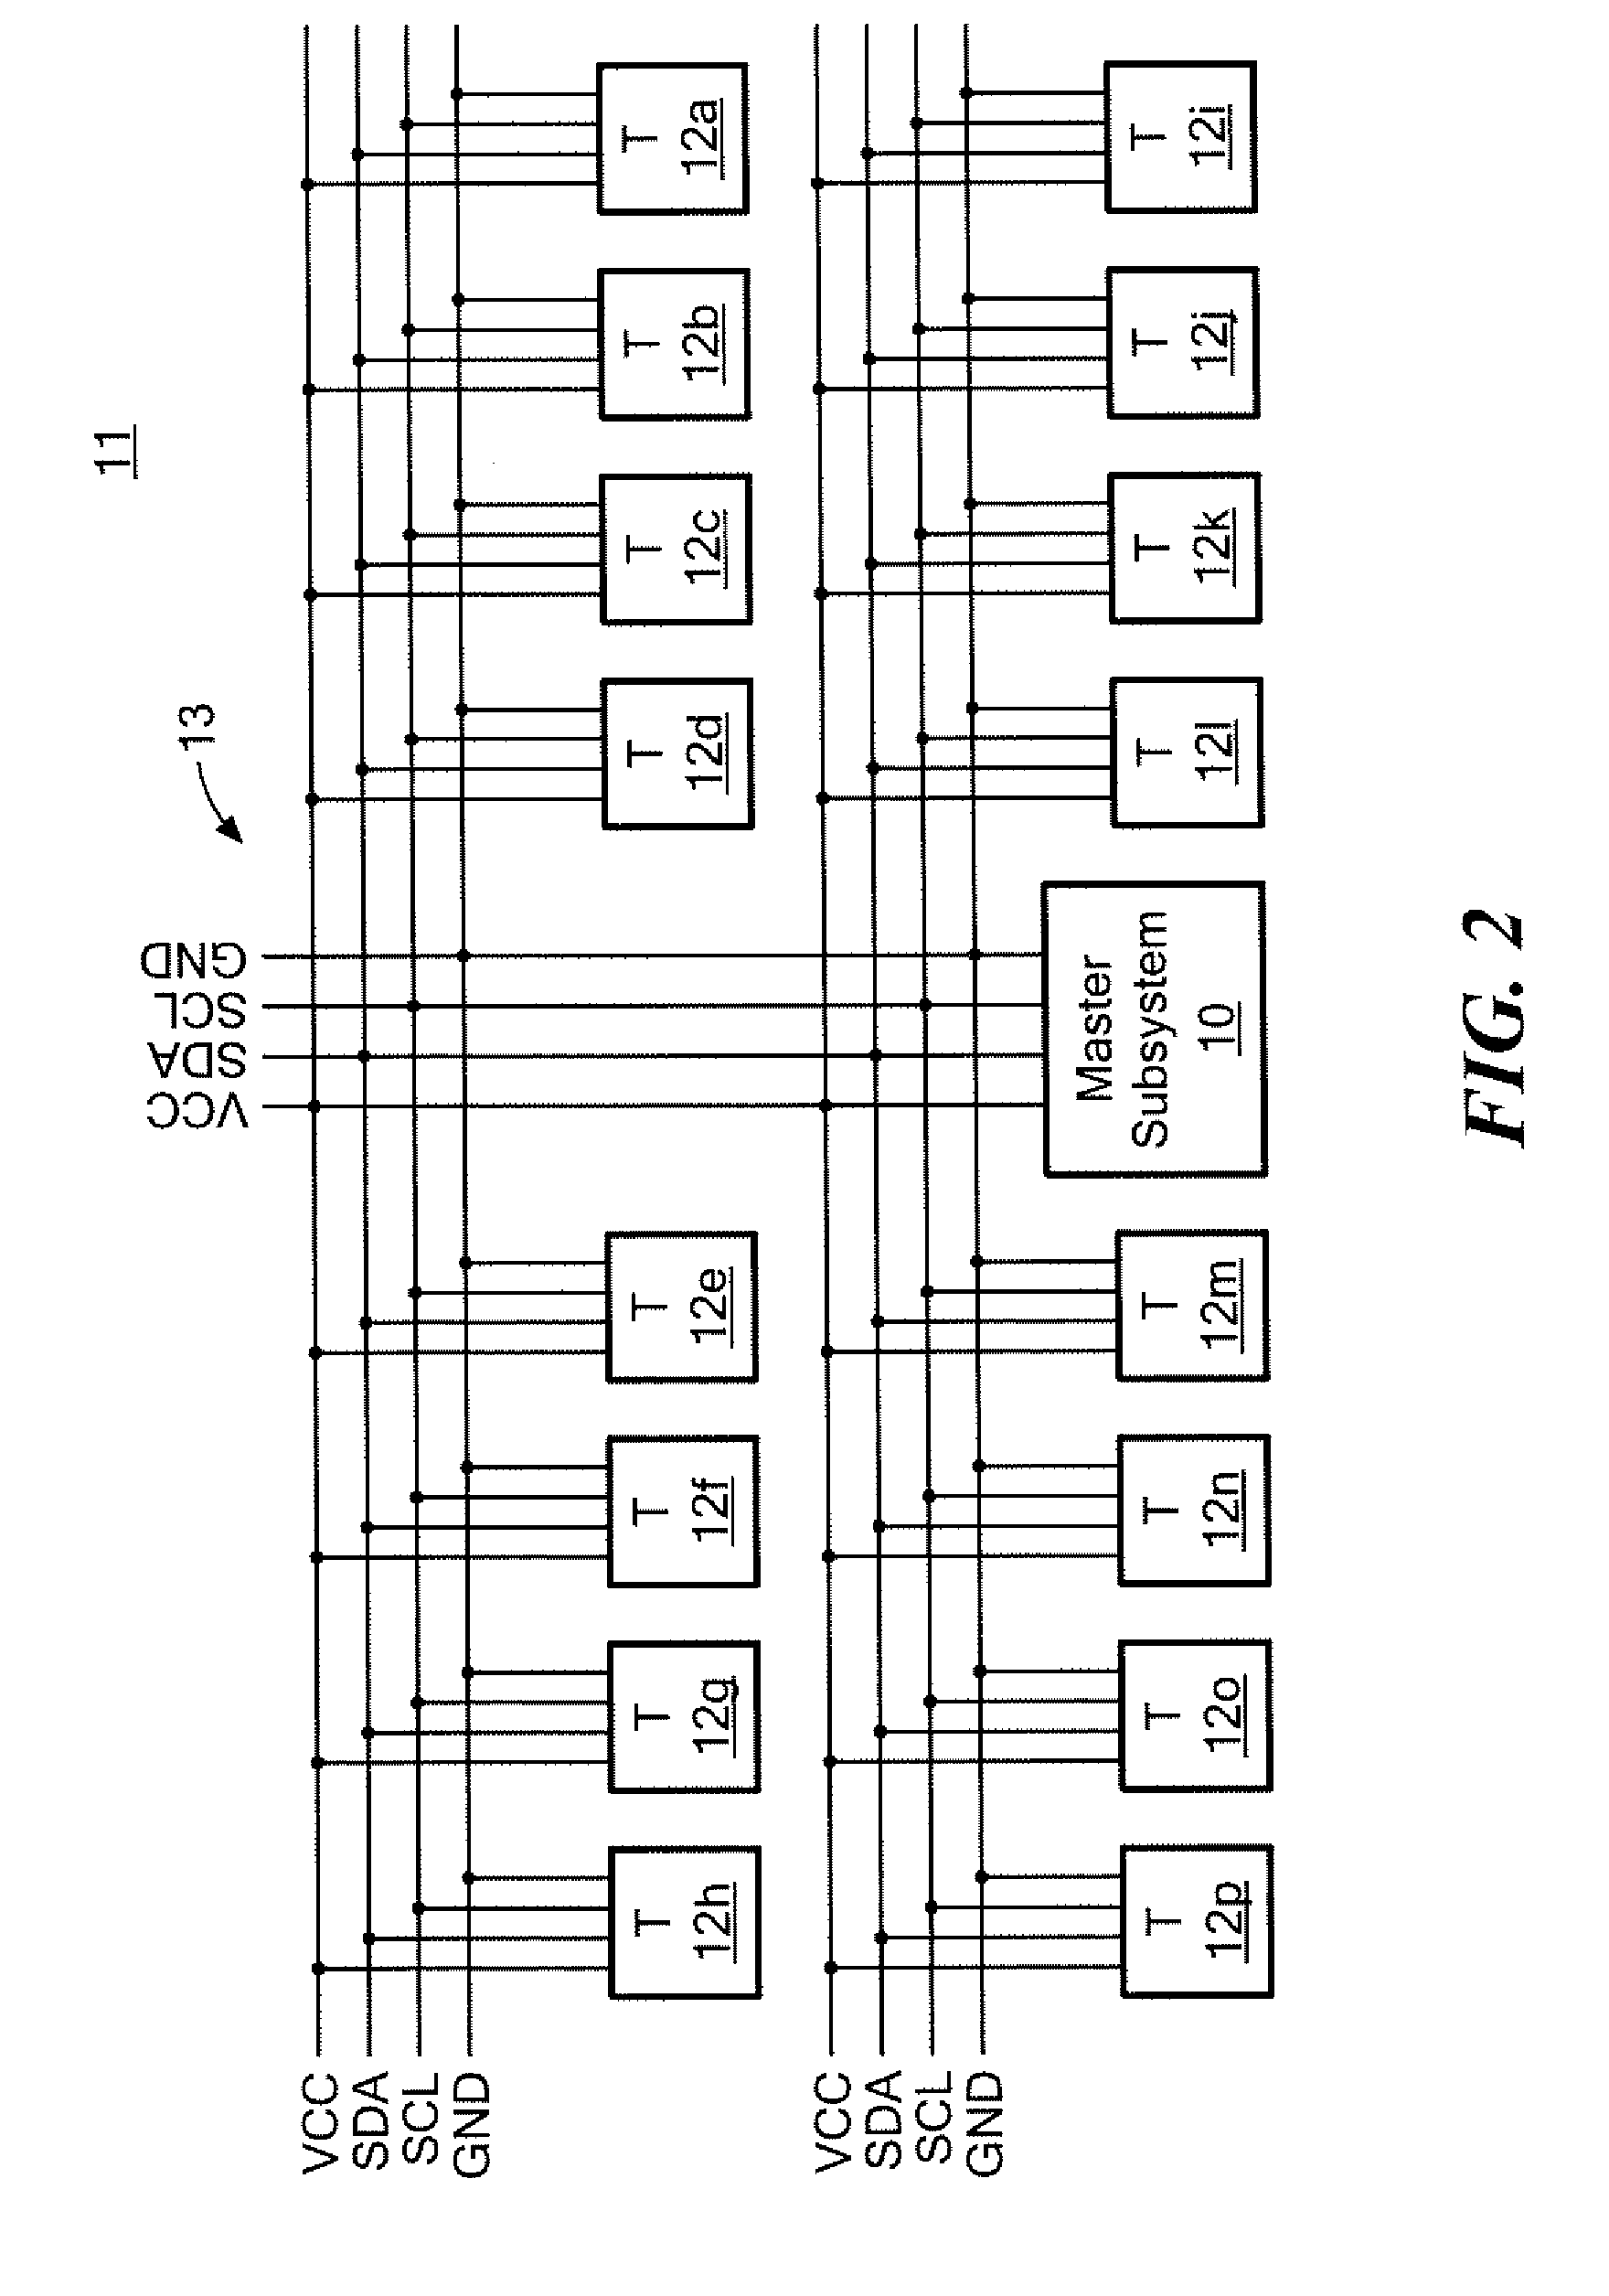 Bussed haptic actuator system and method